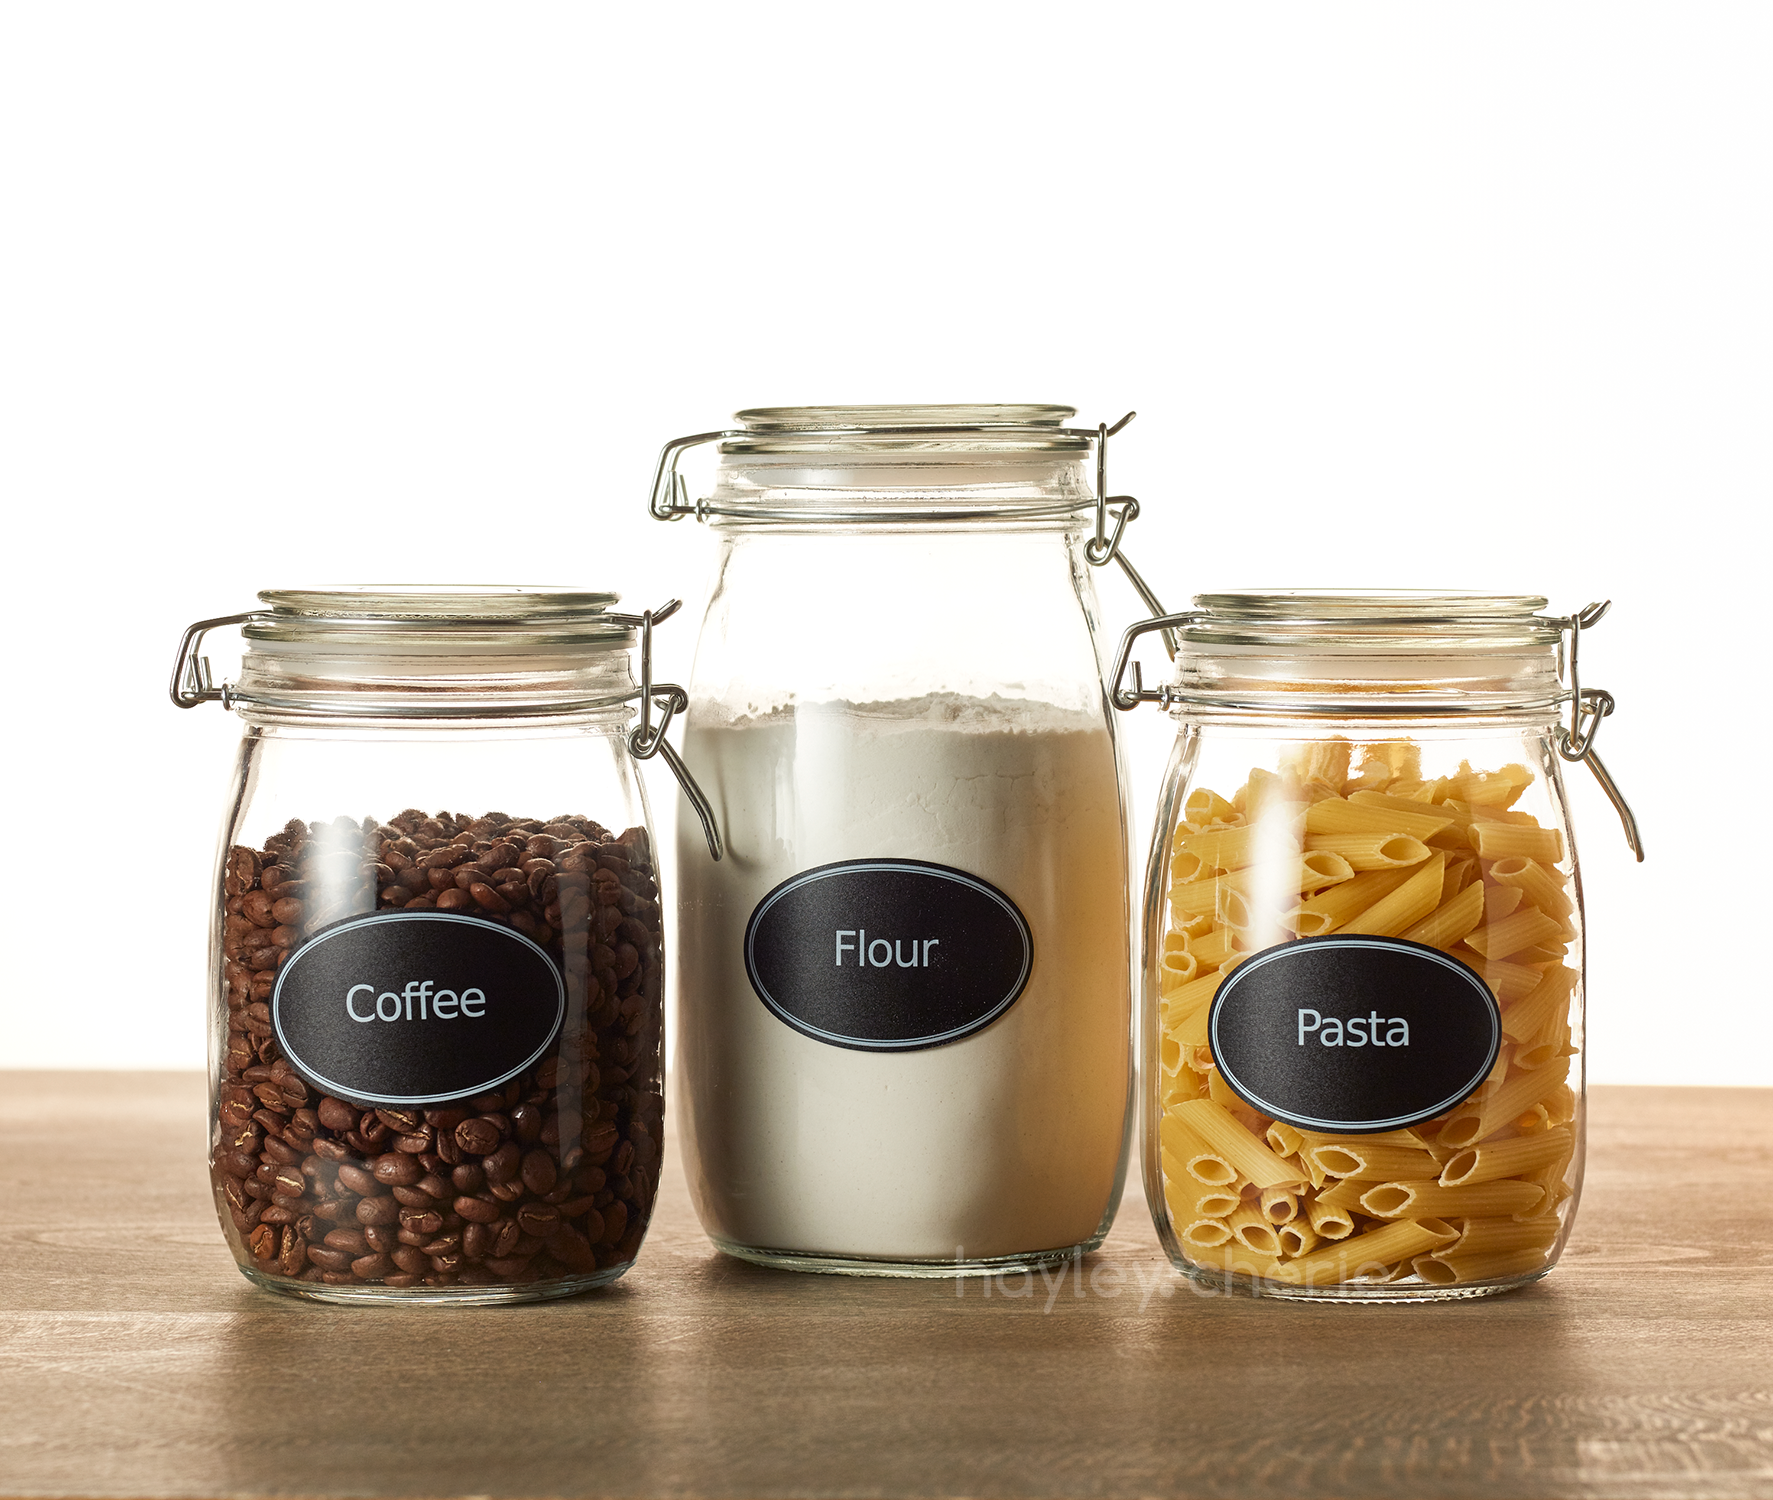  Hayley Cherie - 6 oz Large Square Glass Spice Jars (Set of 10)  - Chalkboard Labels, Stainless Steel Lids and Large & Small Shaker Inserts:  Home & Kitchen